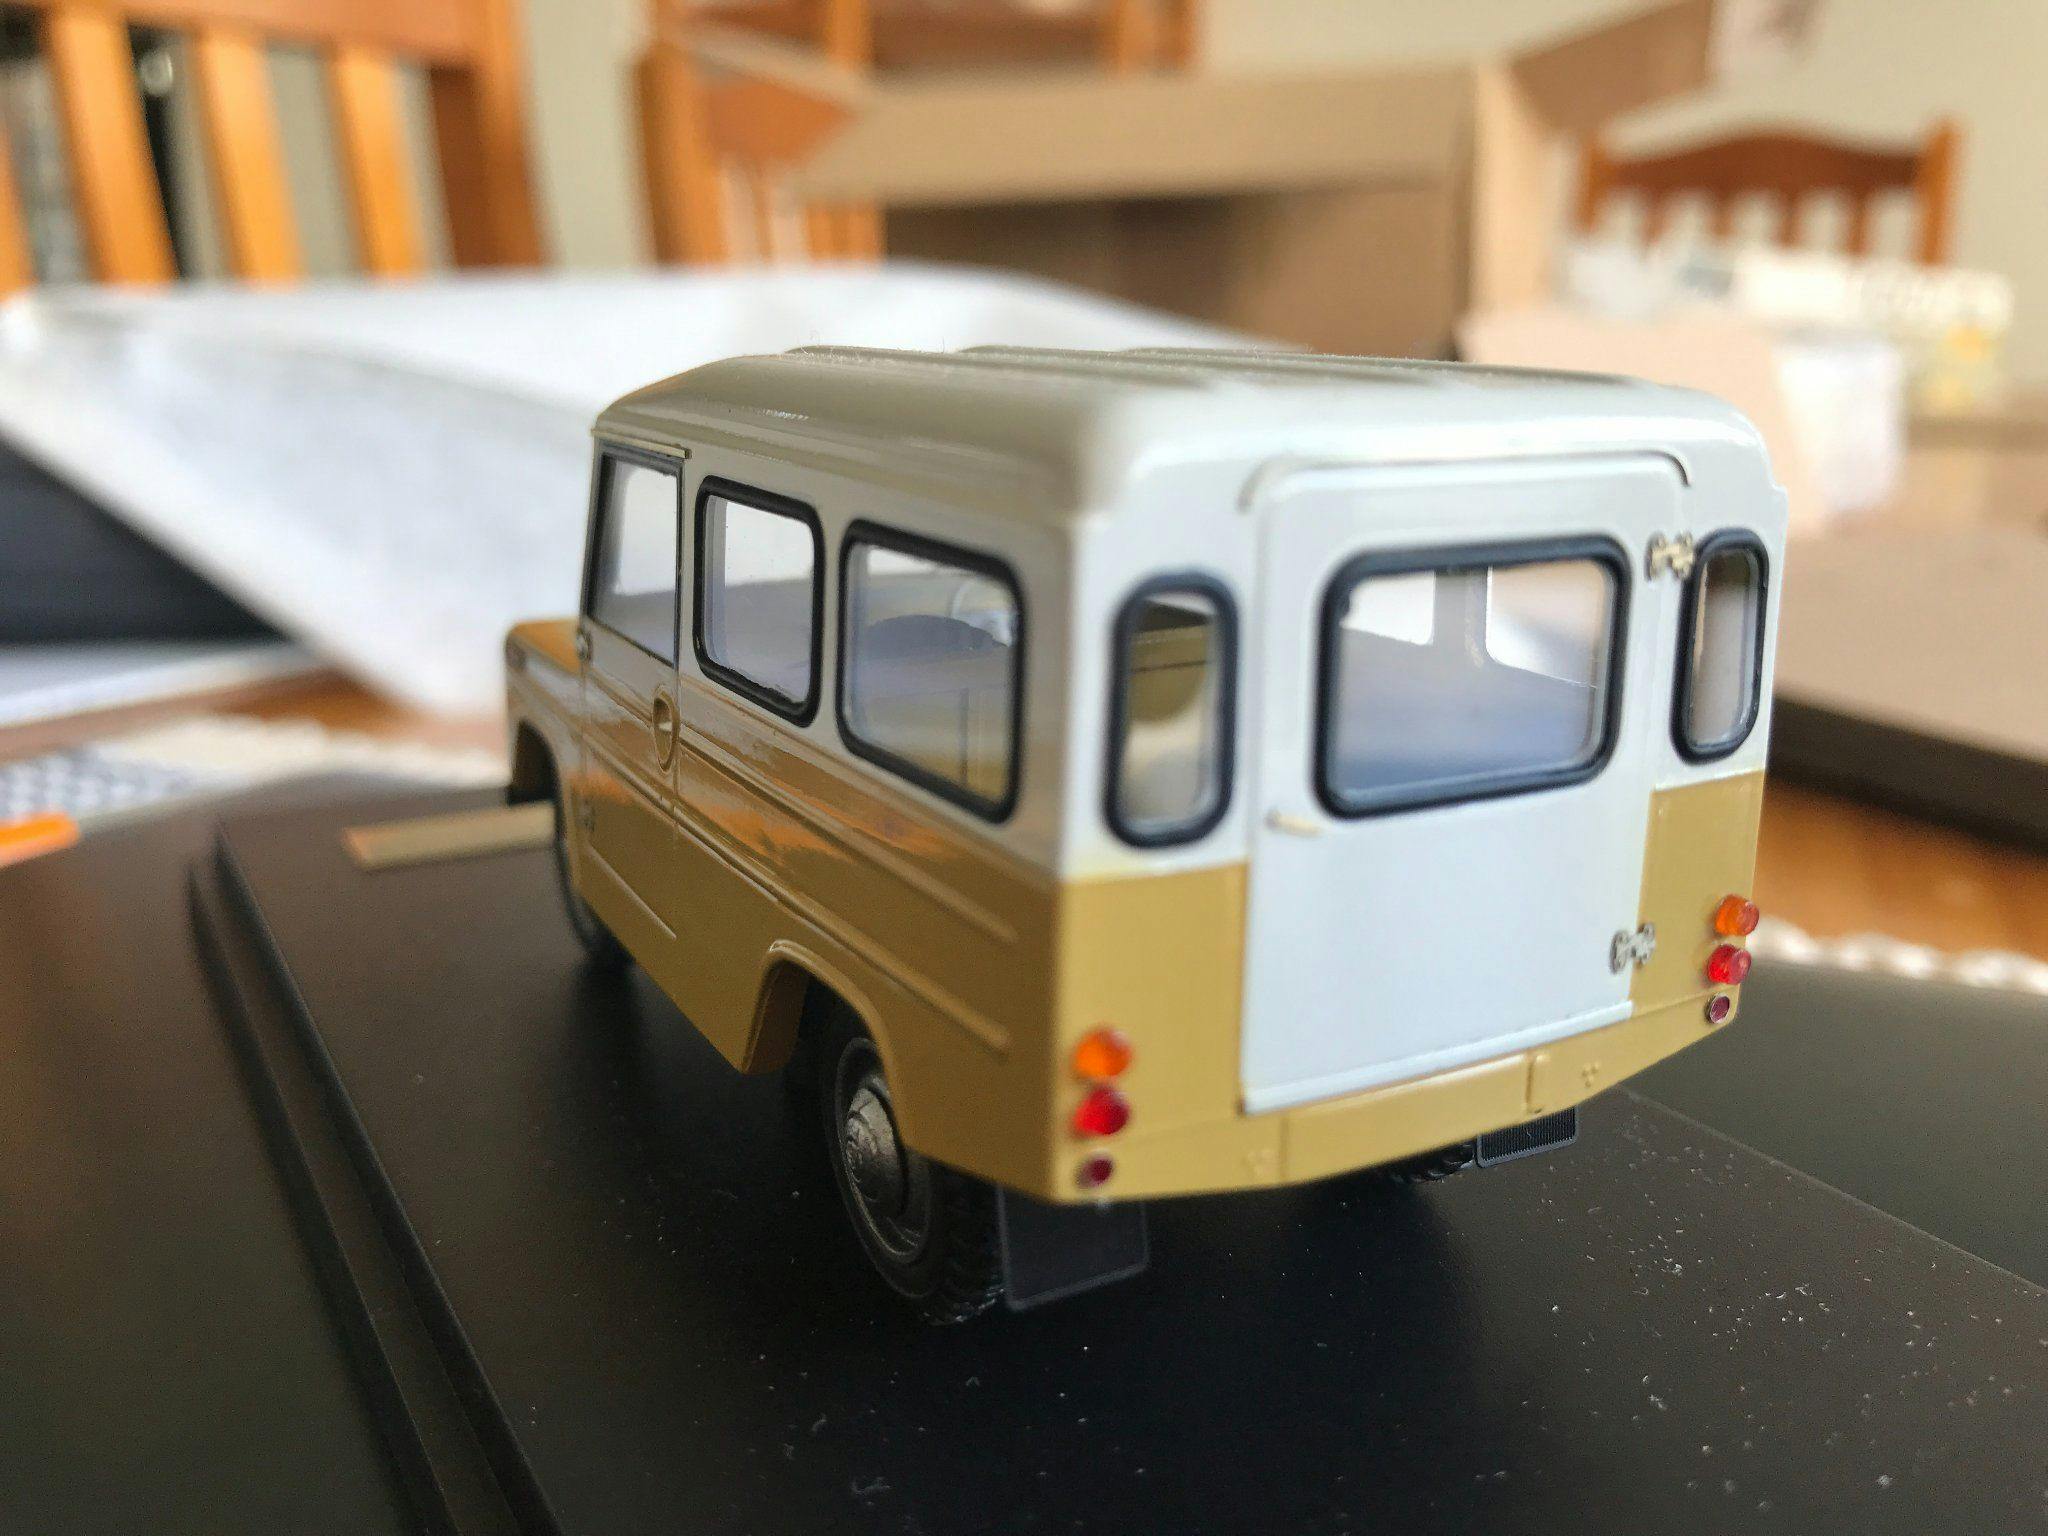 Back view of a completed Trekka model